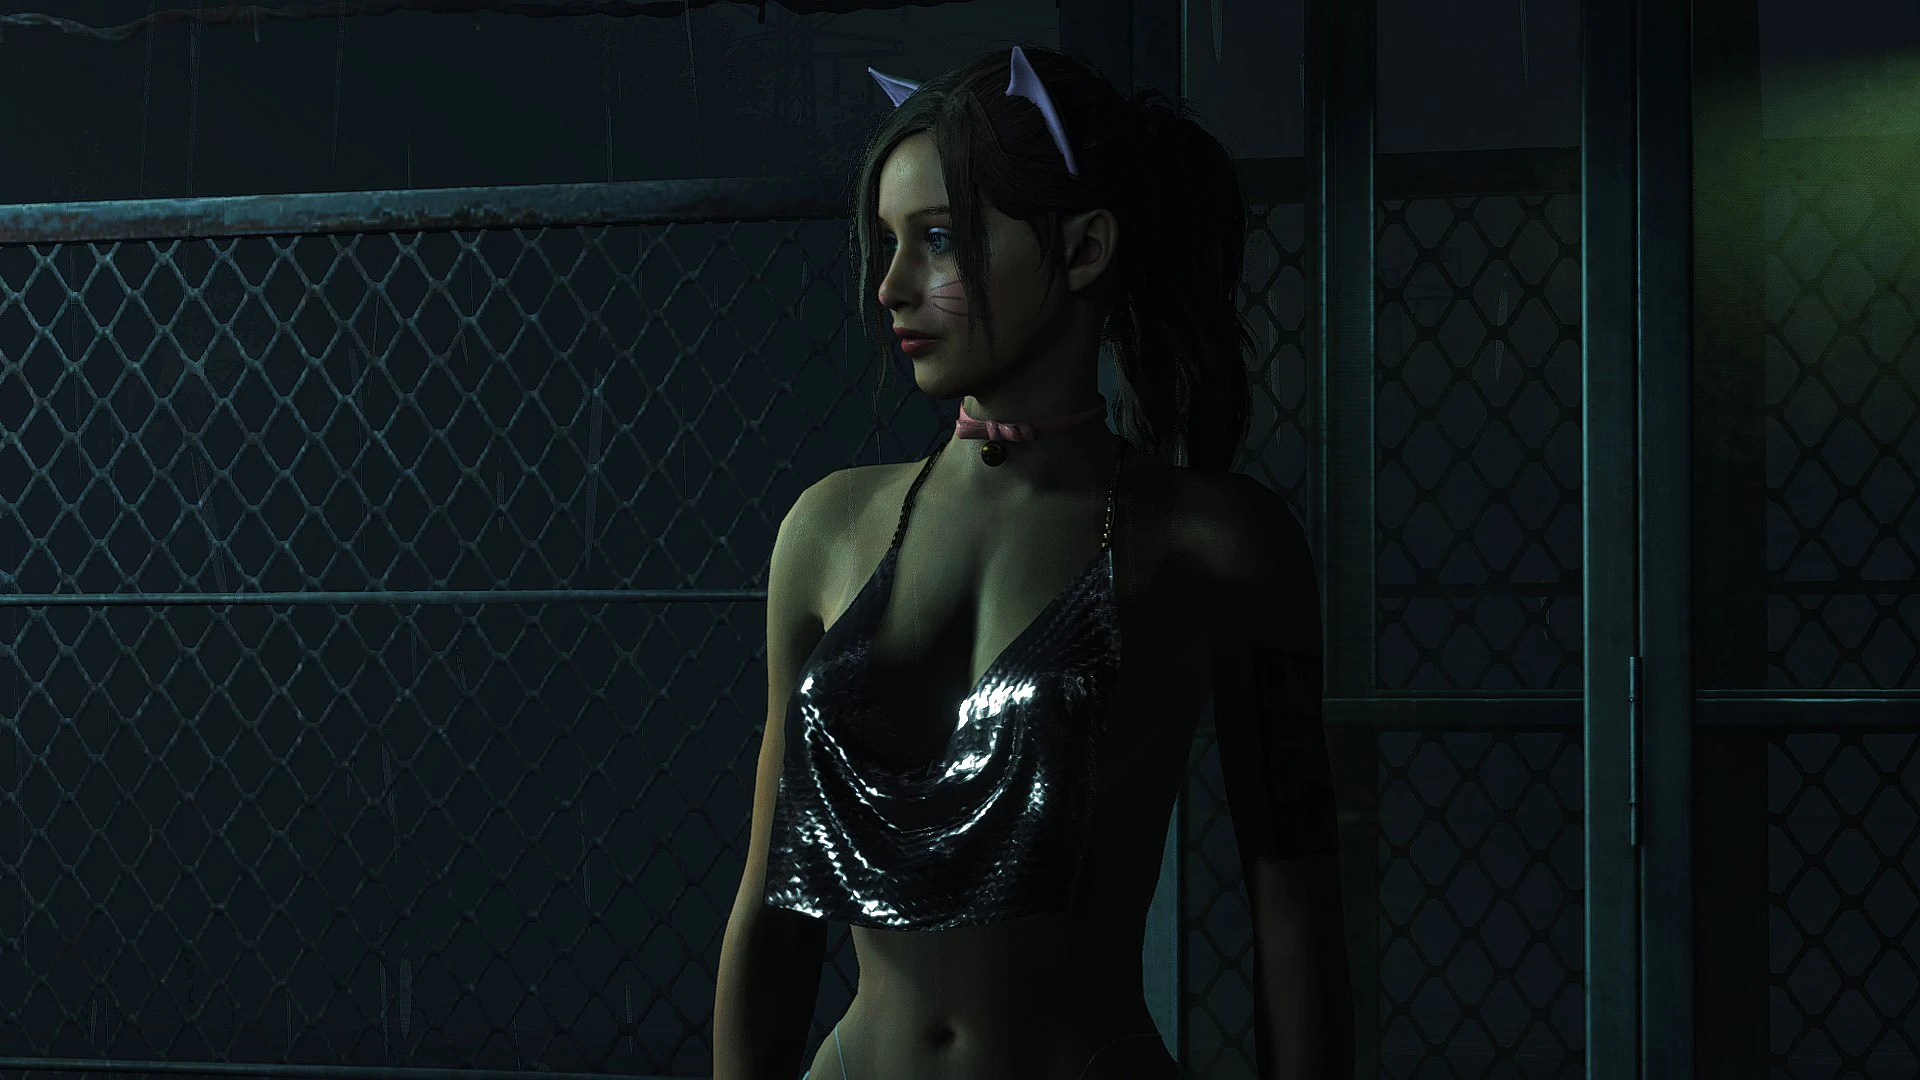 claire resident evil 2 remake nude mod